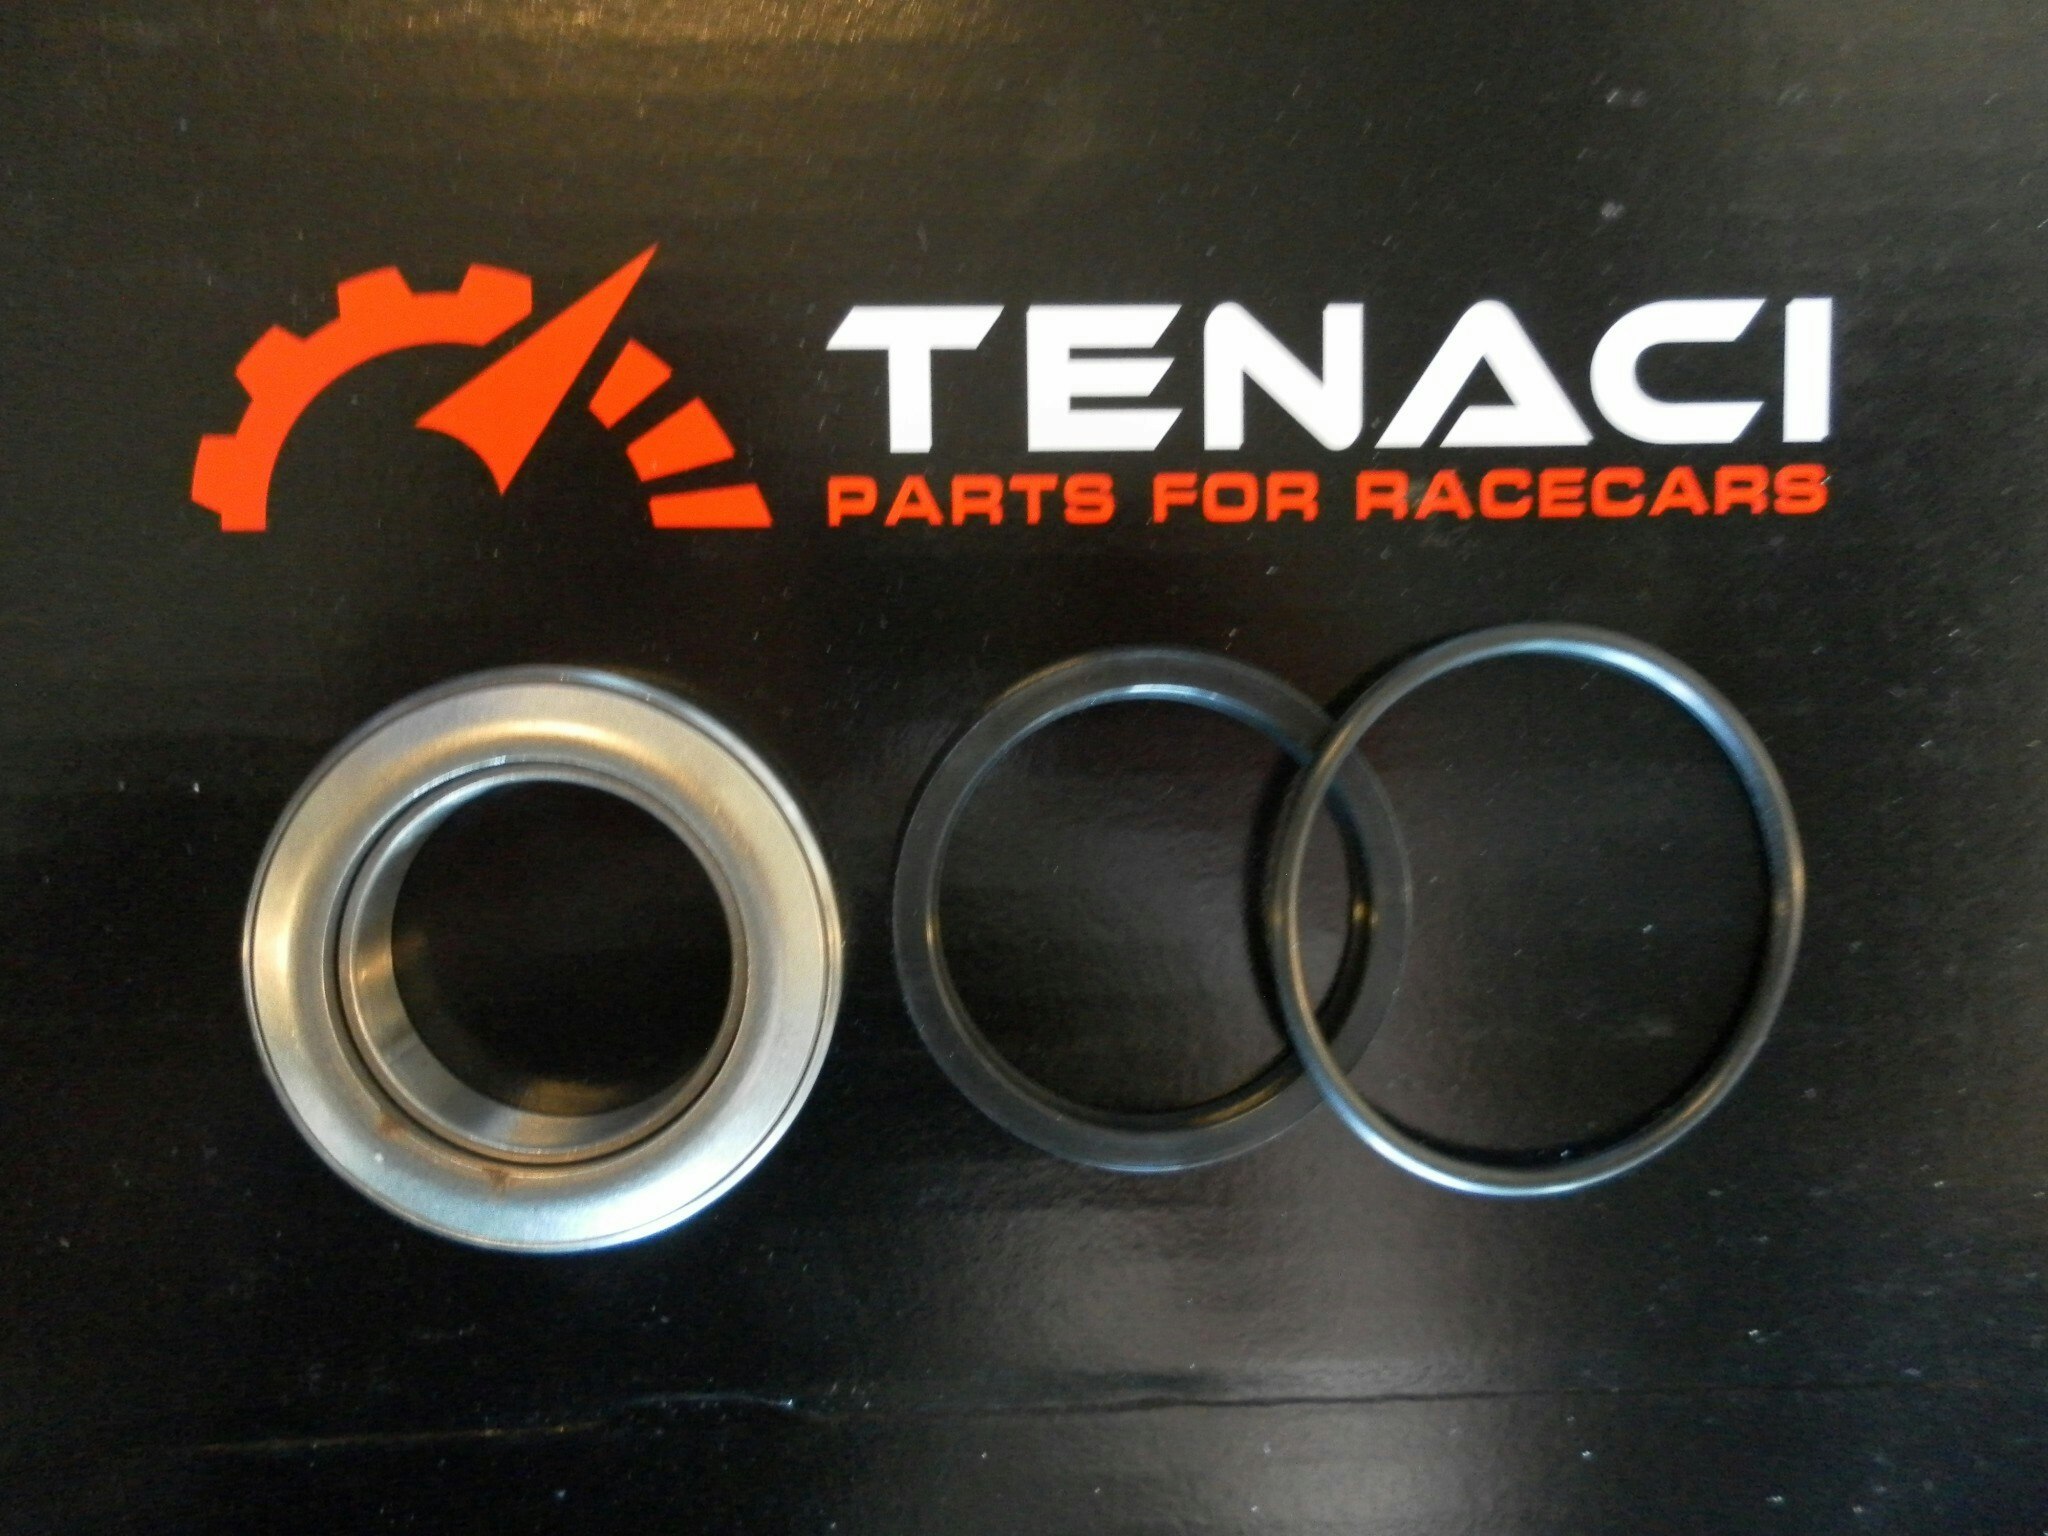 Reperation kit for Tenaci Adjustable Hydraulic Clutch Release Bearings 184-200 mm